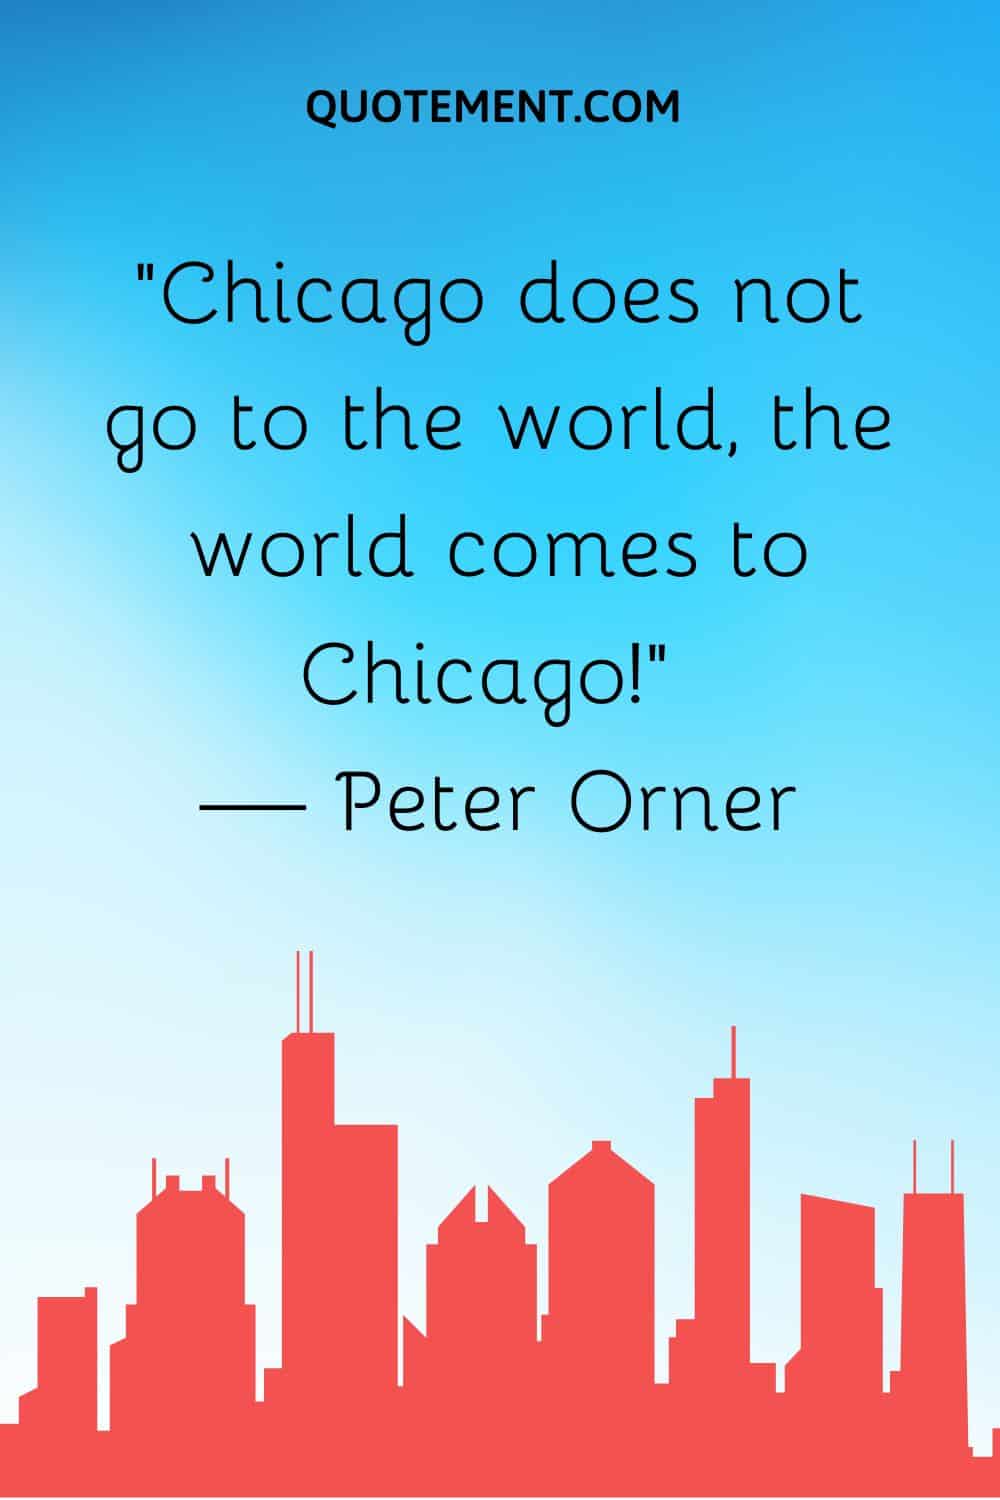 “Chicago does not go to the world, the world comes to Chicago!” — Peter Orner